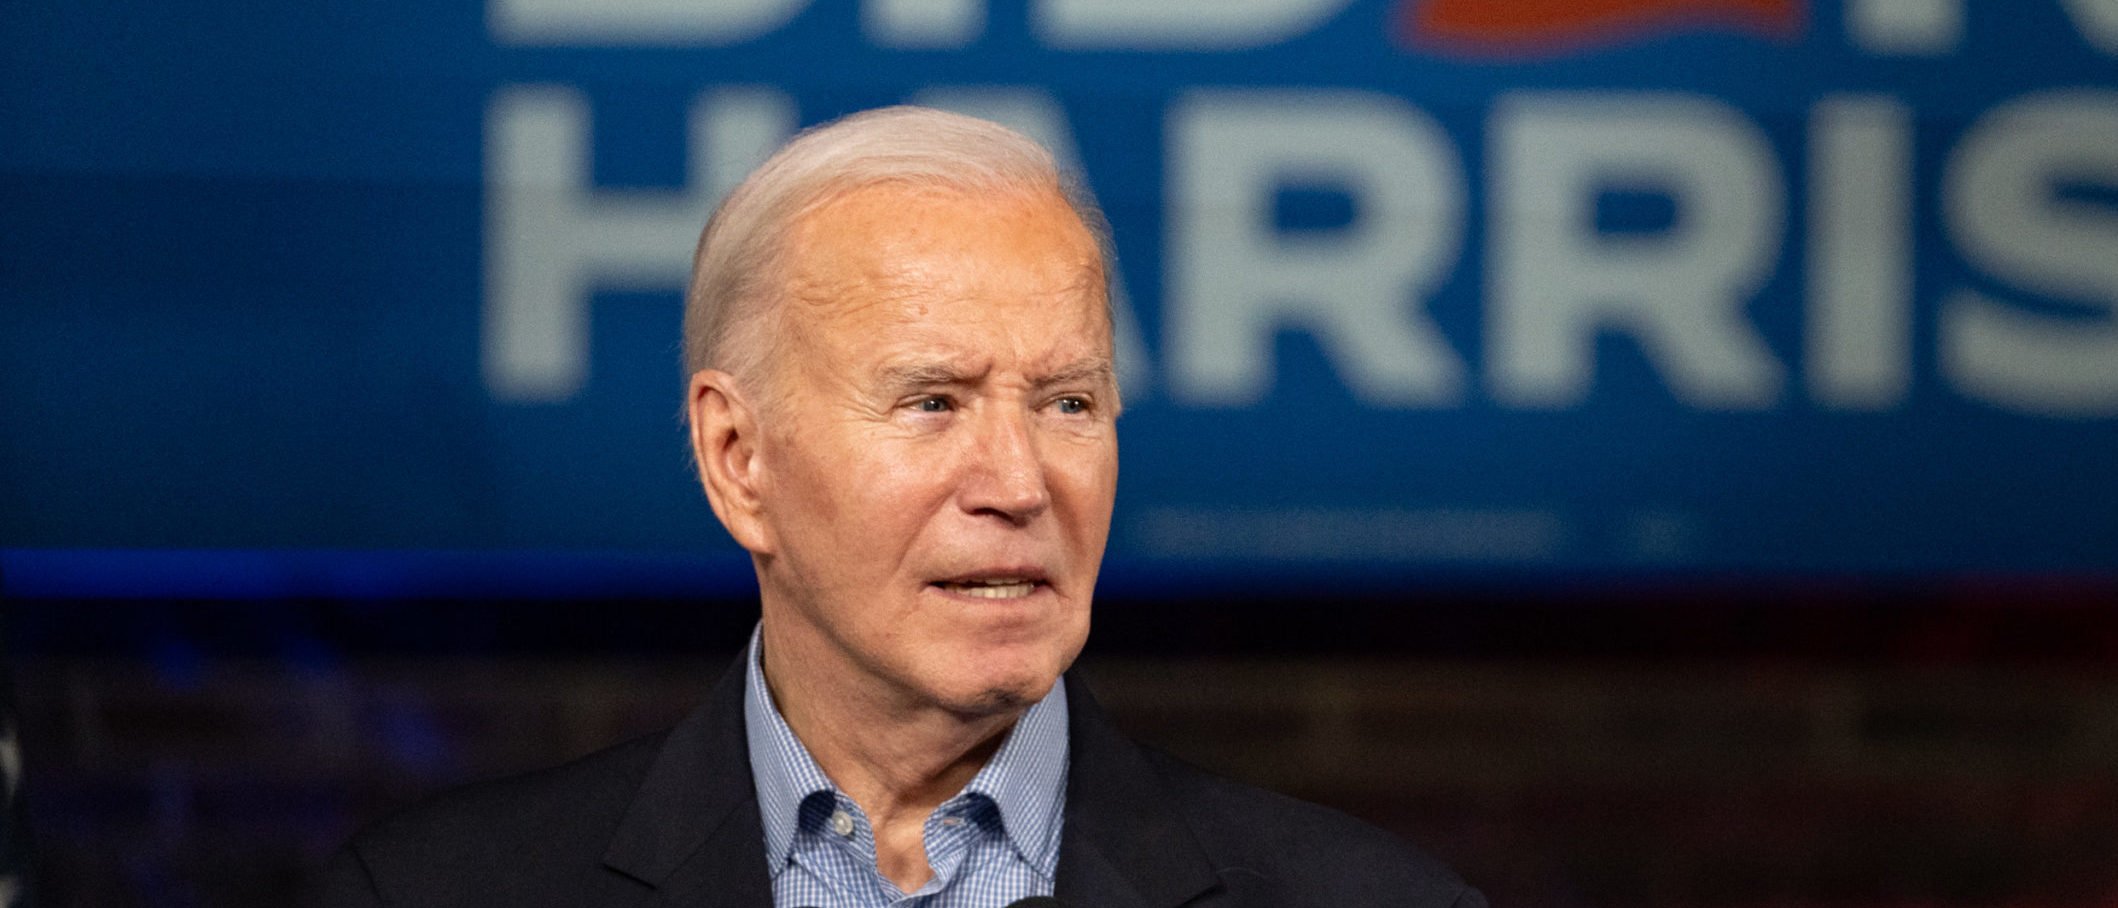 ‘Craven Political Ploy’: Biden’s Attempt To Appear Moderate On Abortion Is Not Sitting Well With Dems